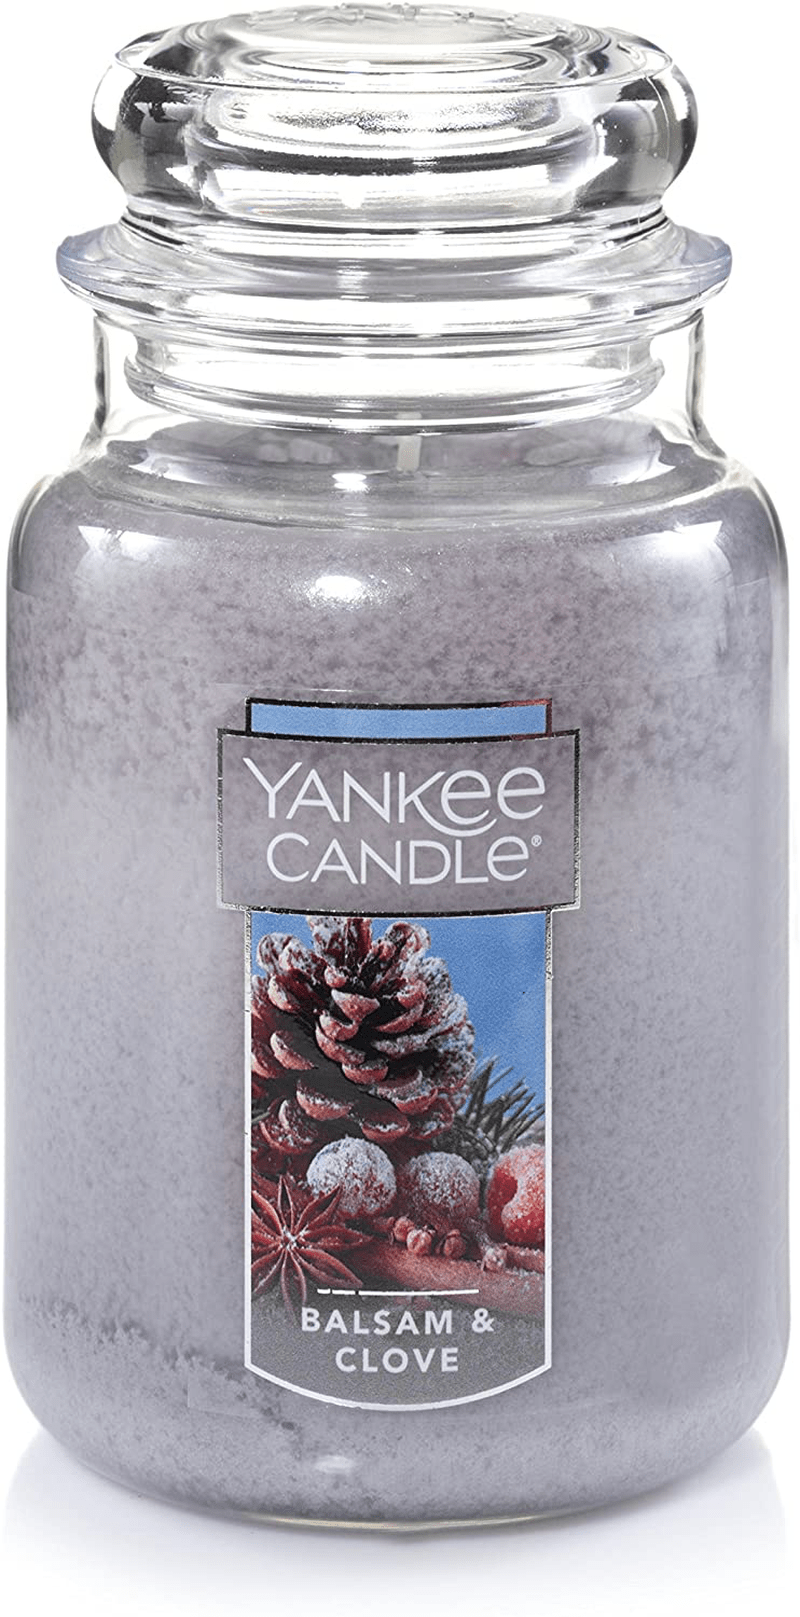 Yankee Candle Large Jar Candle Home Sweet Home Home & Garden > Decor > Home Fragrances > Candles Yankee Candle Balsam & Clove Large Jar 